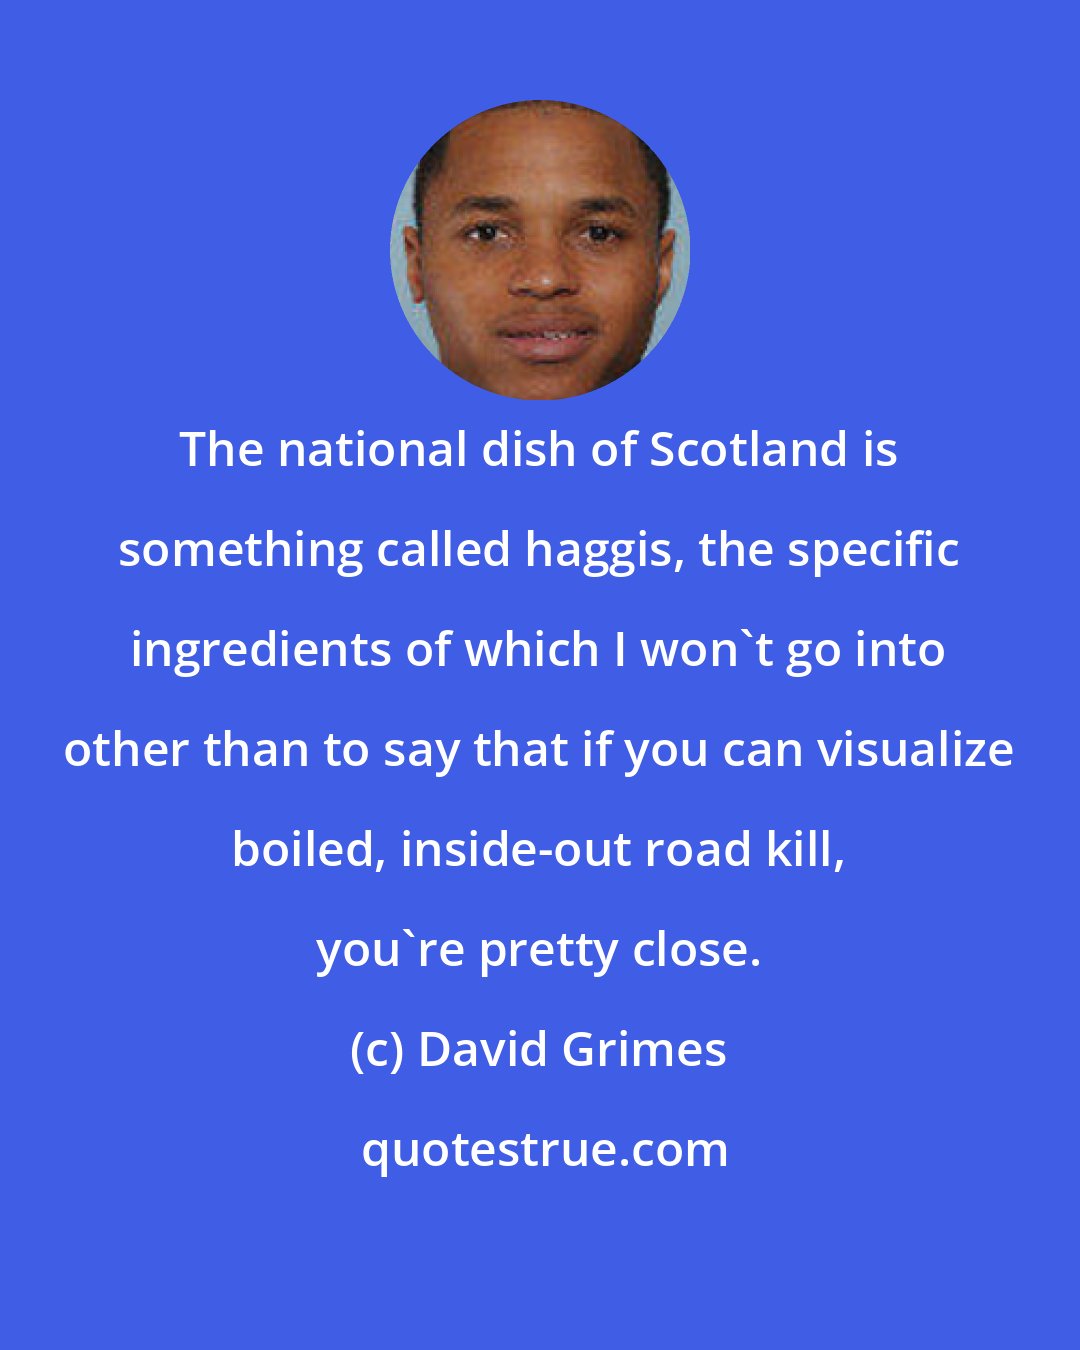 David Grimes: The national dish of Scotland is something called haggis, the specific ingredients of which I won't go into other than to say that if you can visualize boiled, inside-out road kill, you're pretty close.